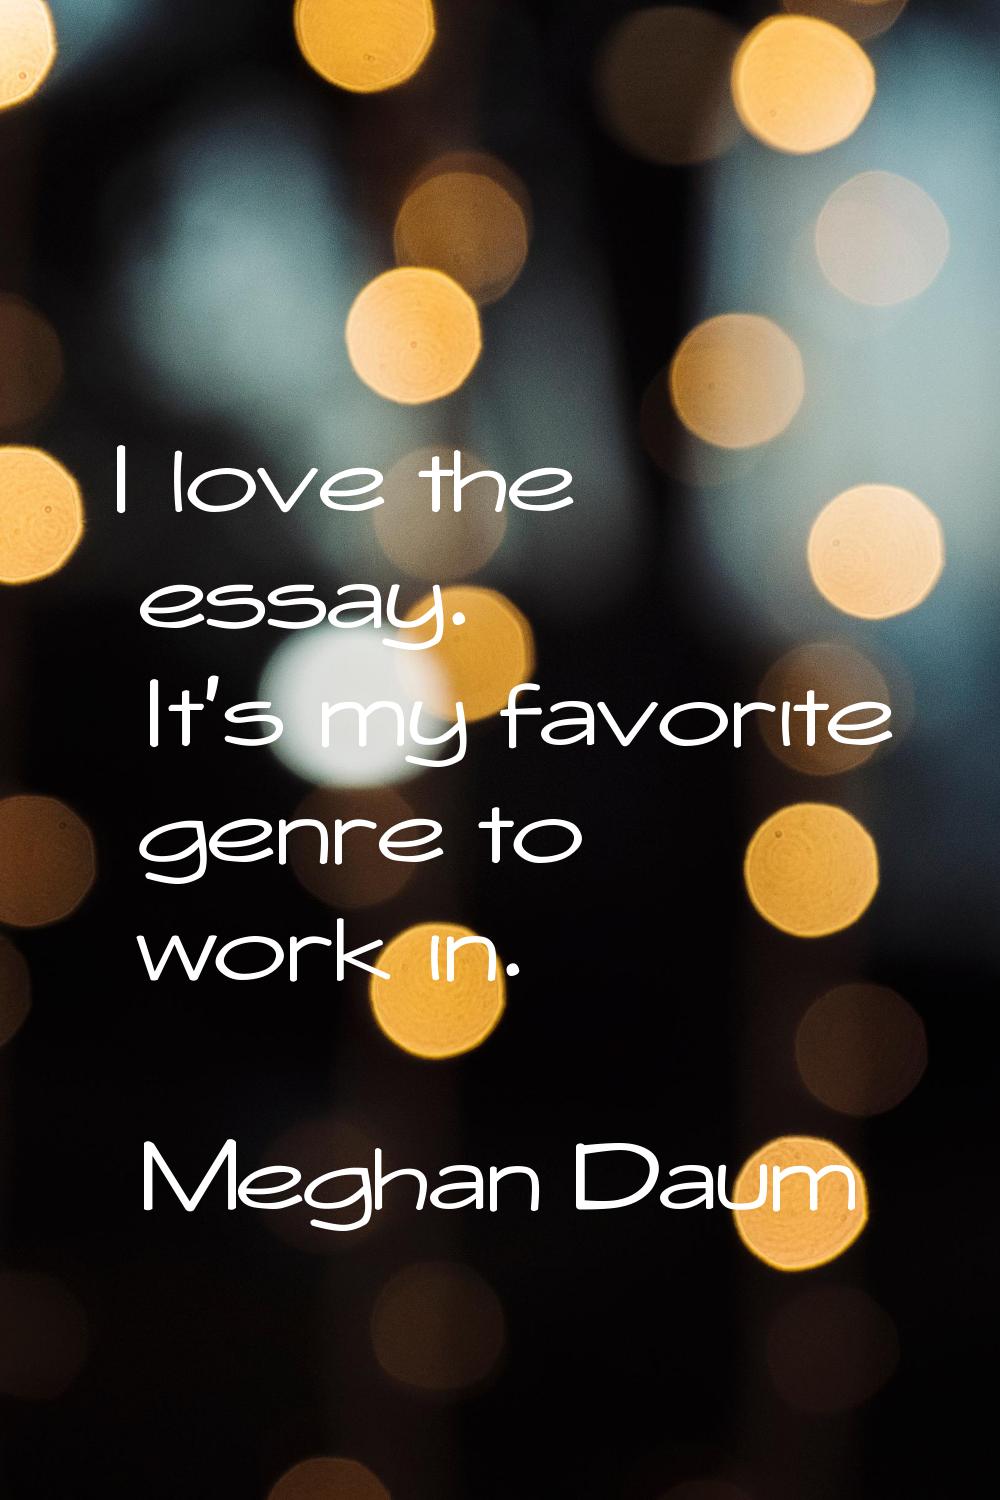 I love the essay. It's my favorite genre to work in.